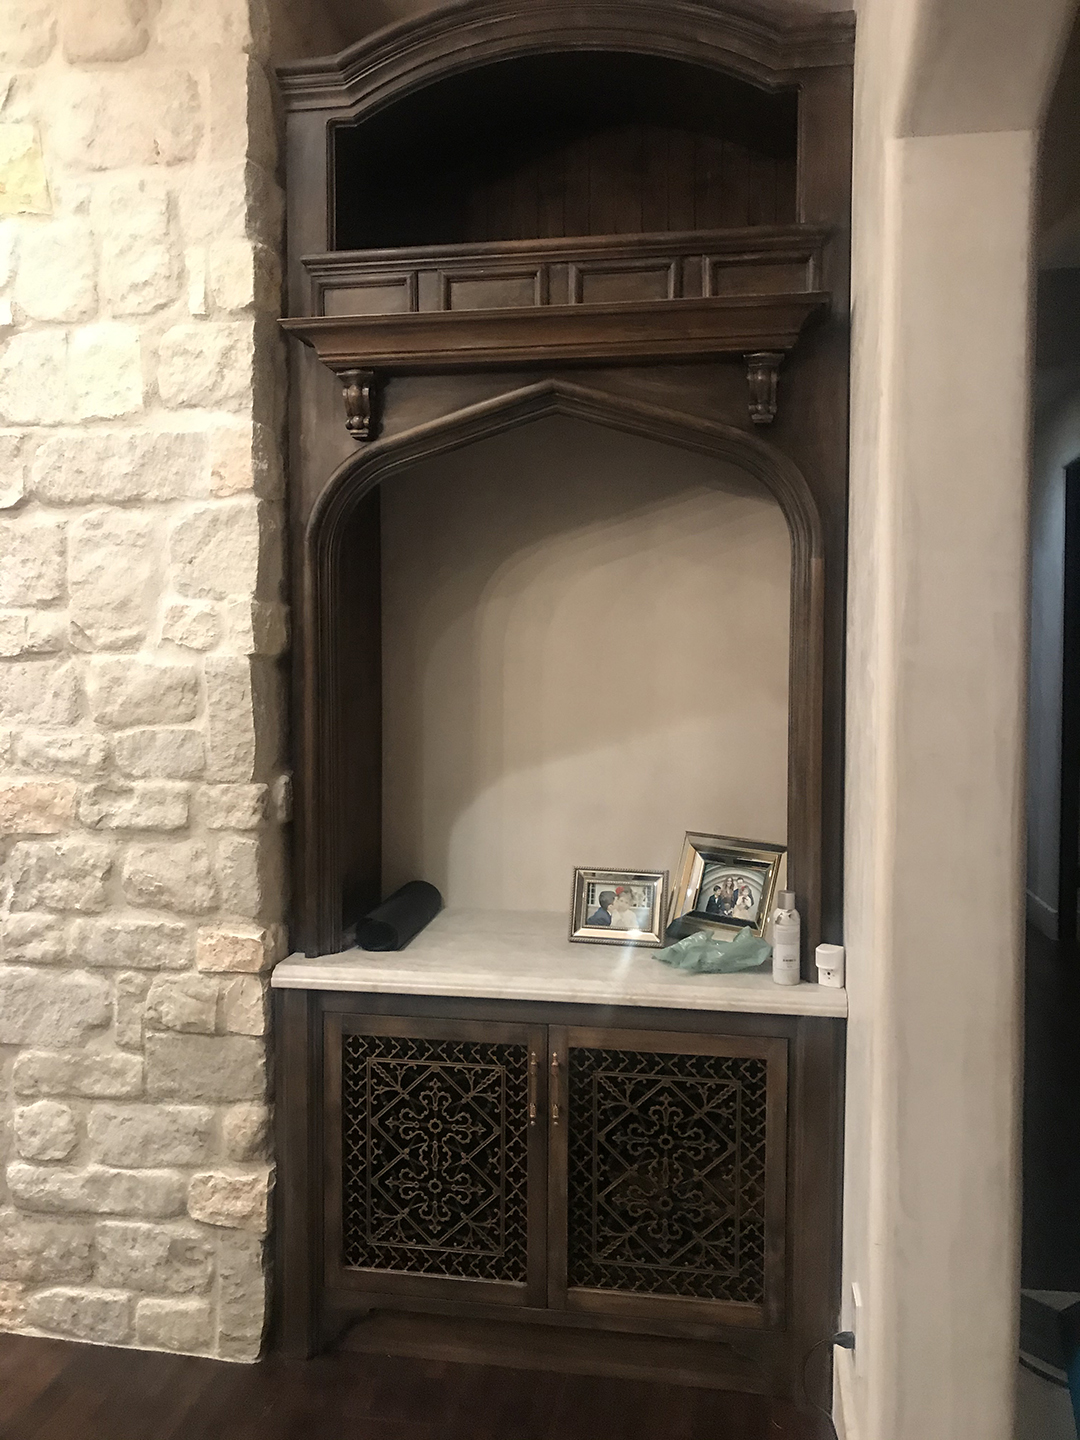 Cabinet with cabnet door grille in Craftsman style Arts and Crafts design.